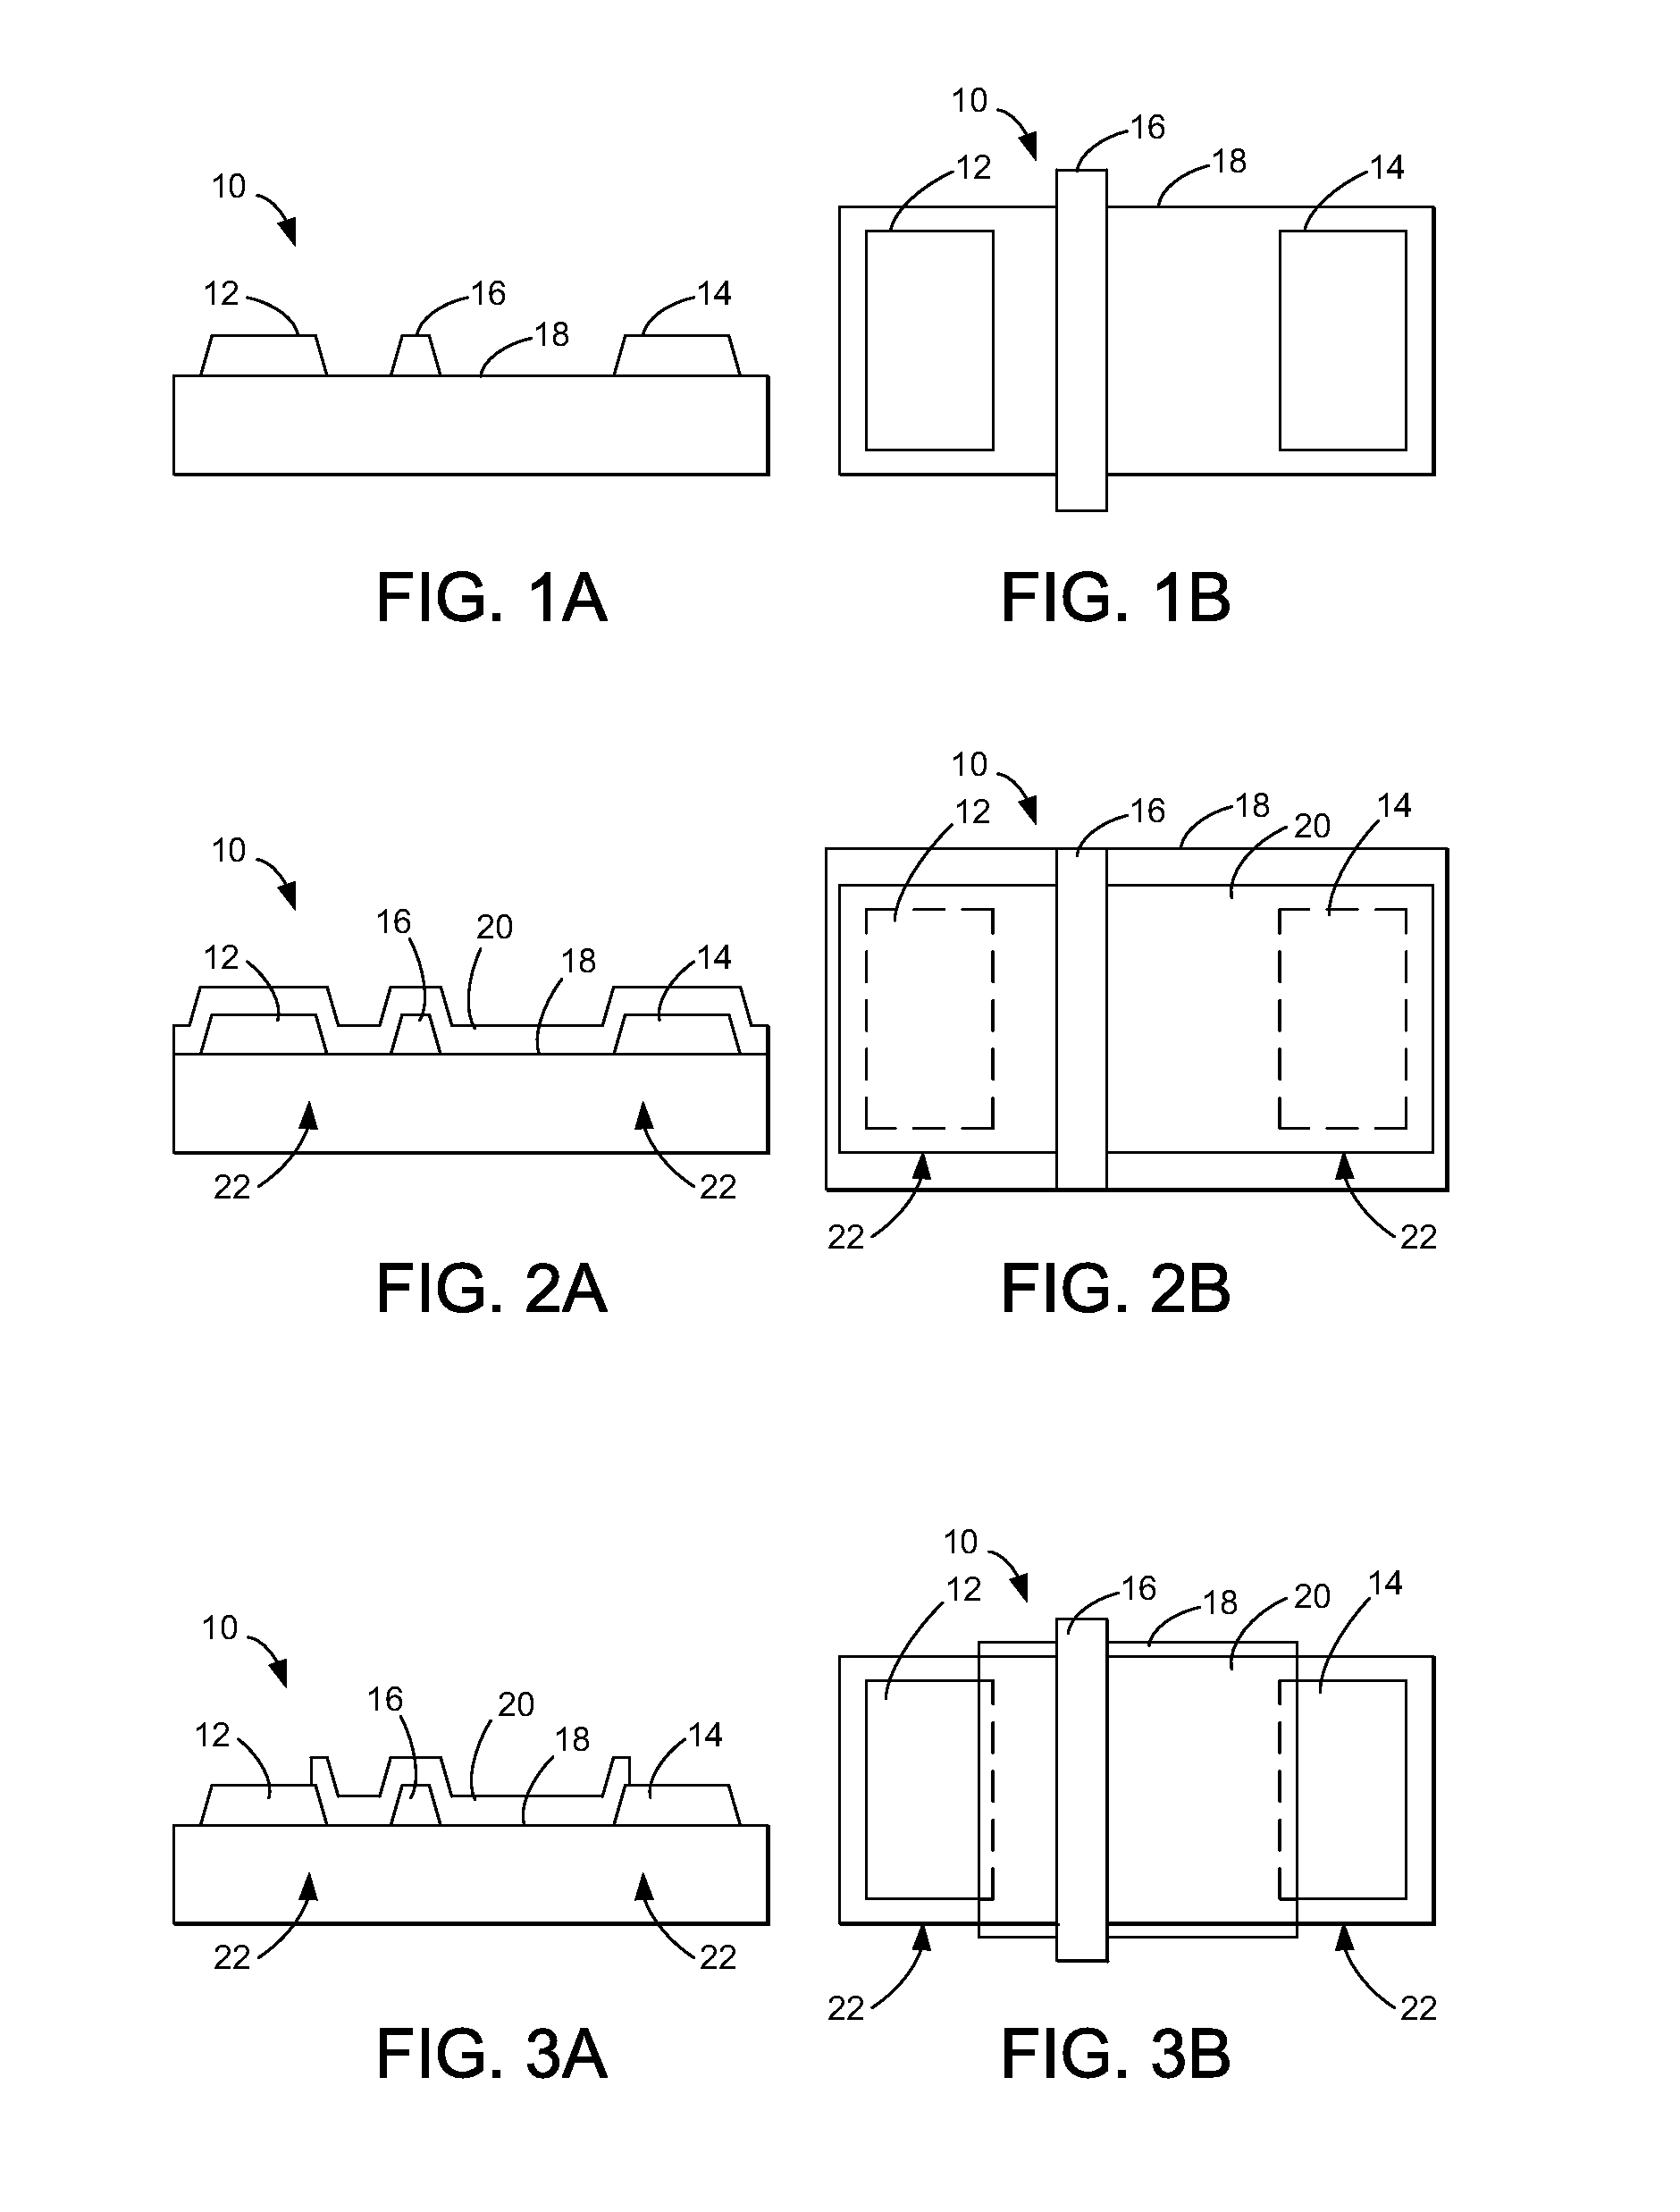 Fabrication of single or multiple gate field plates